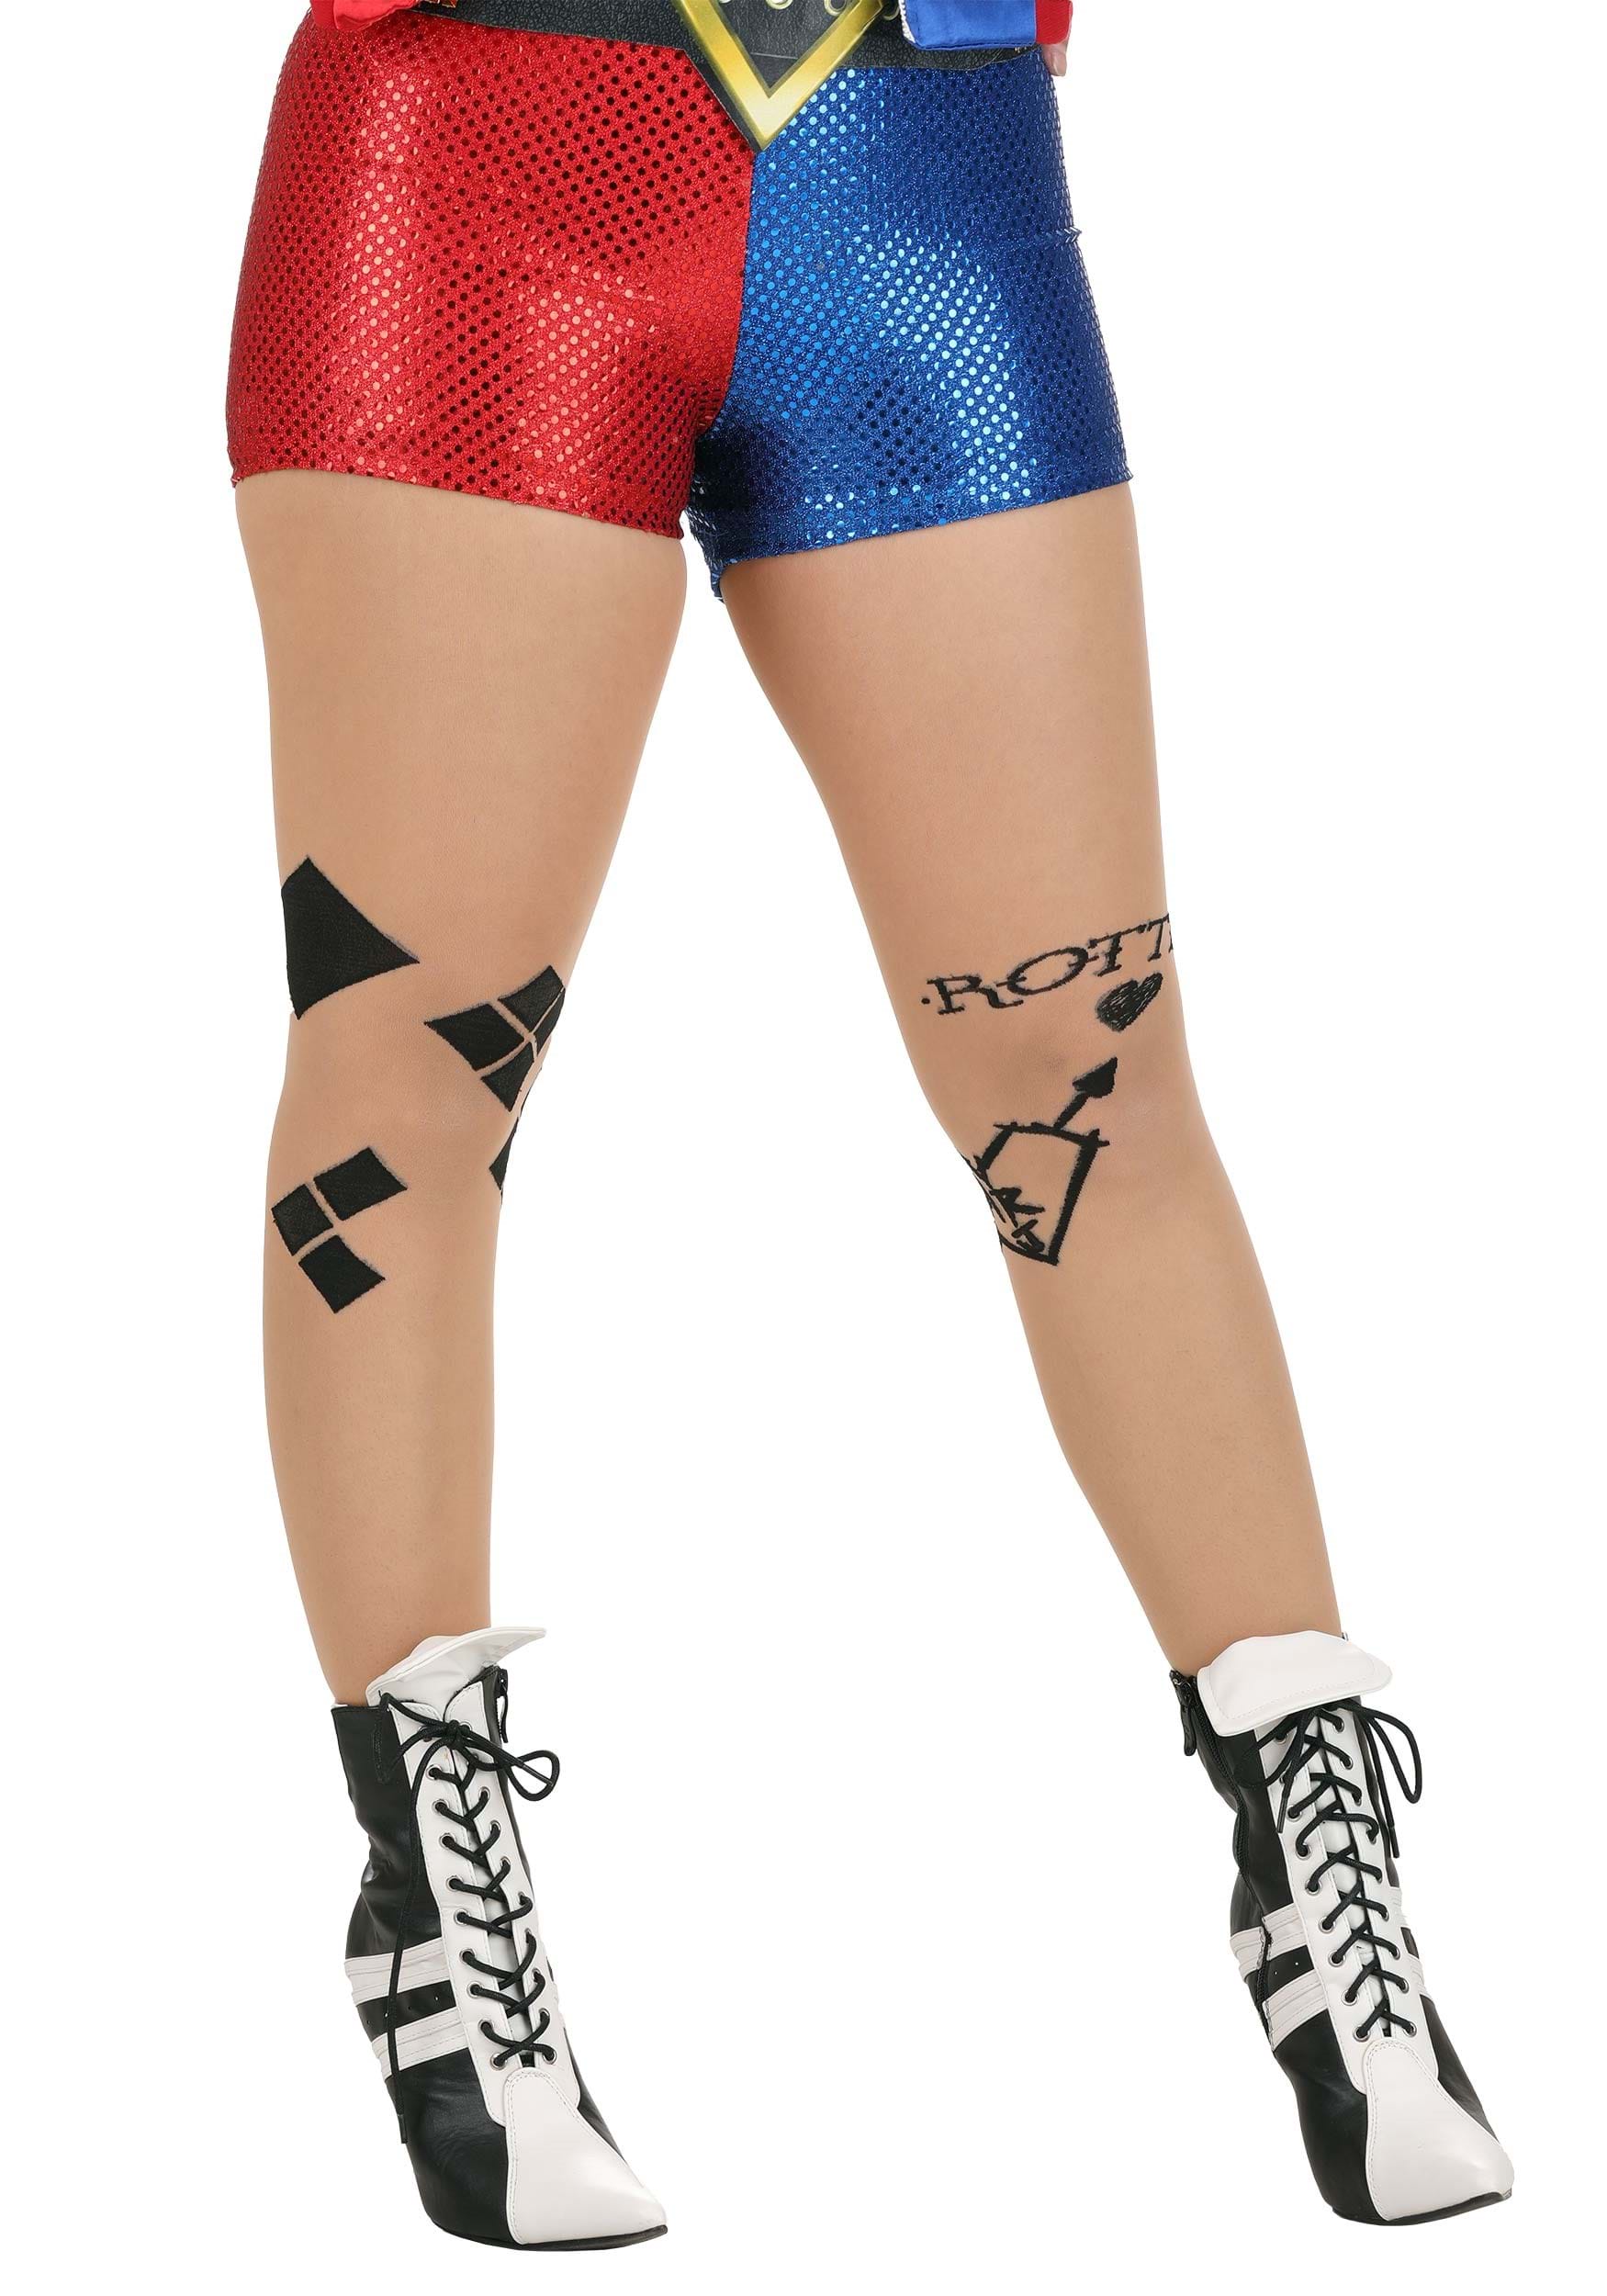 https://images.fun.com/products/89513/1-1/suicide-squad-hq-tights.jpg